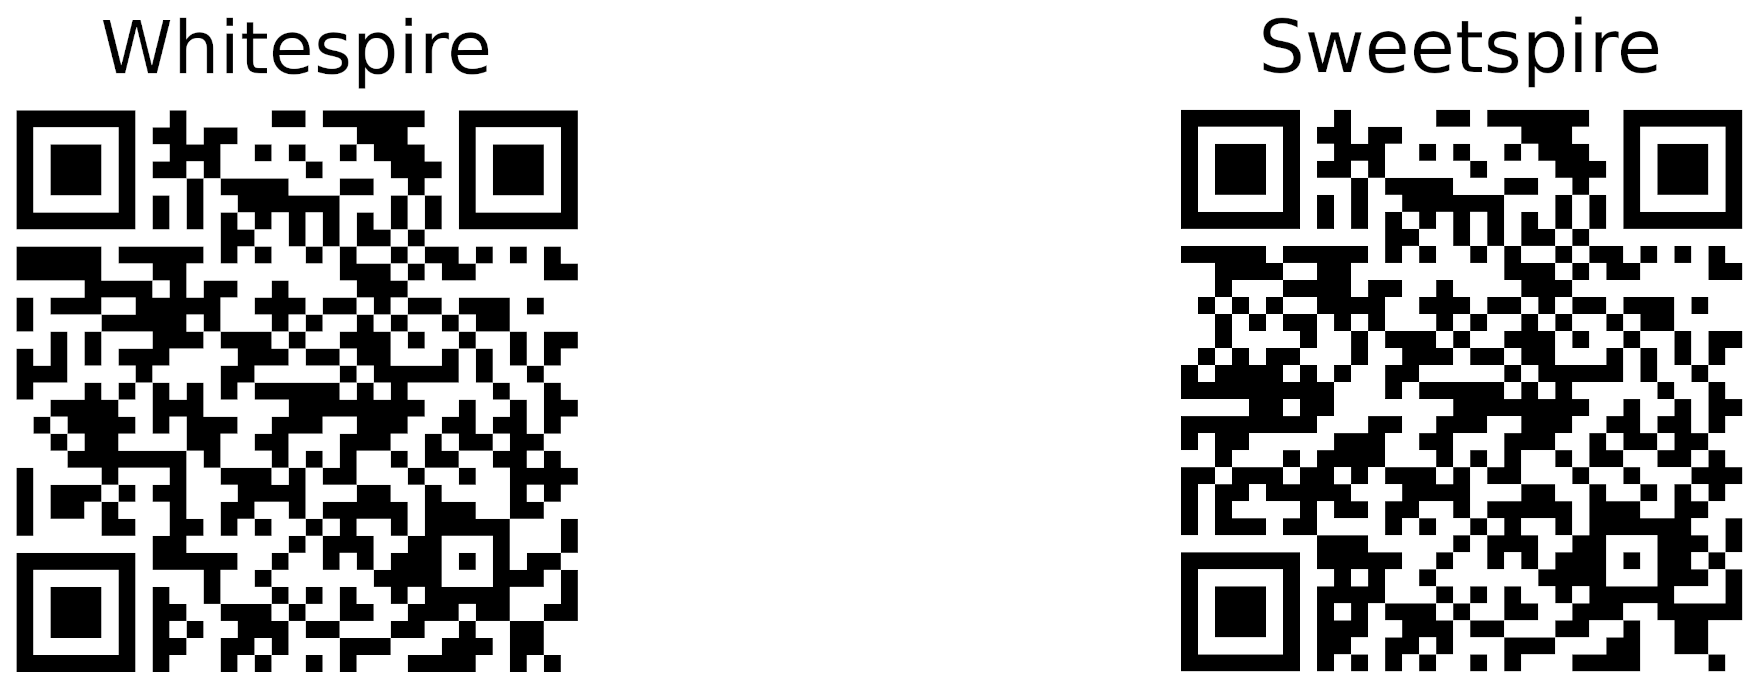 ws-ss-qr-codes-small.png